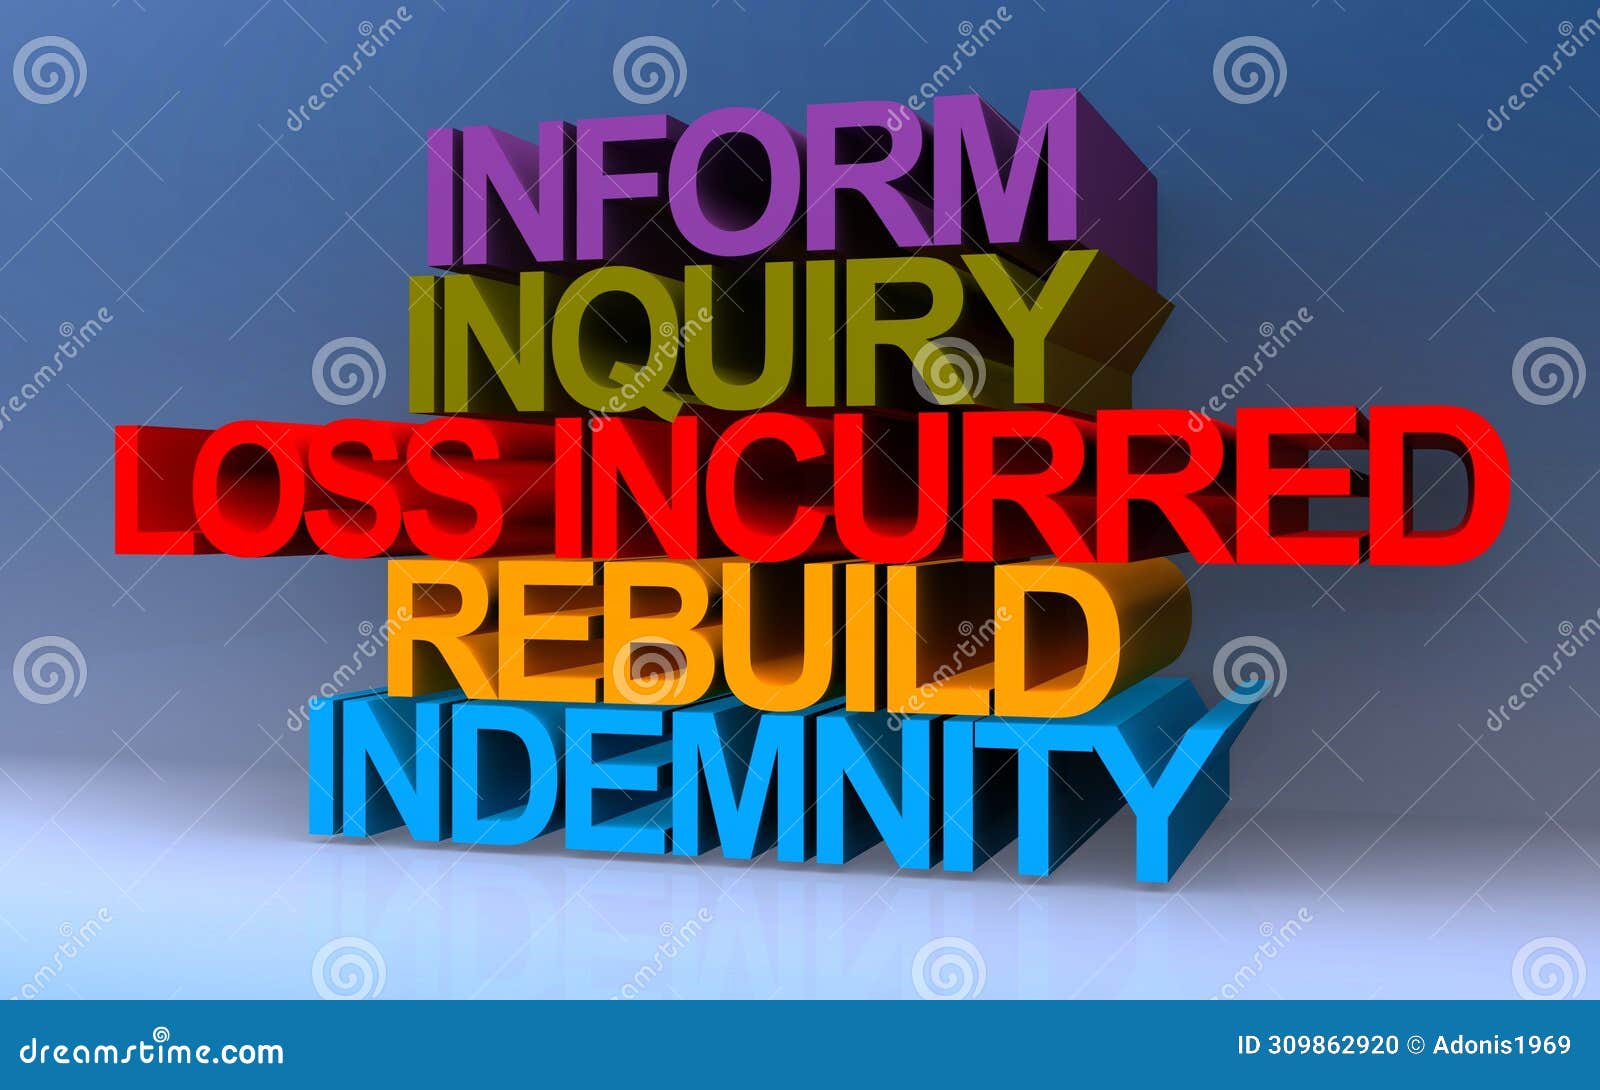 inform inquiry loss incurred rebuild indemnity on blue